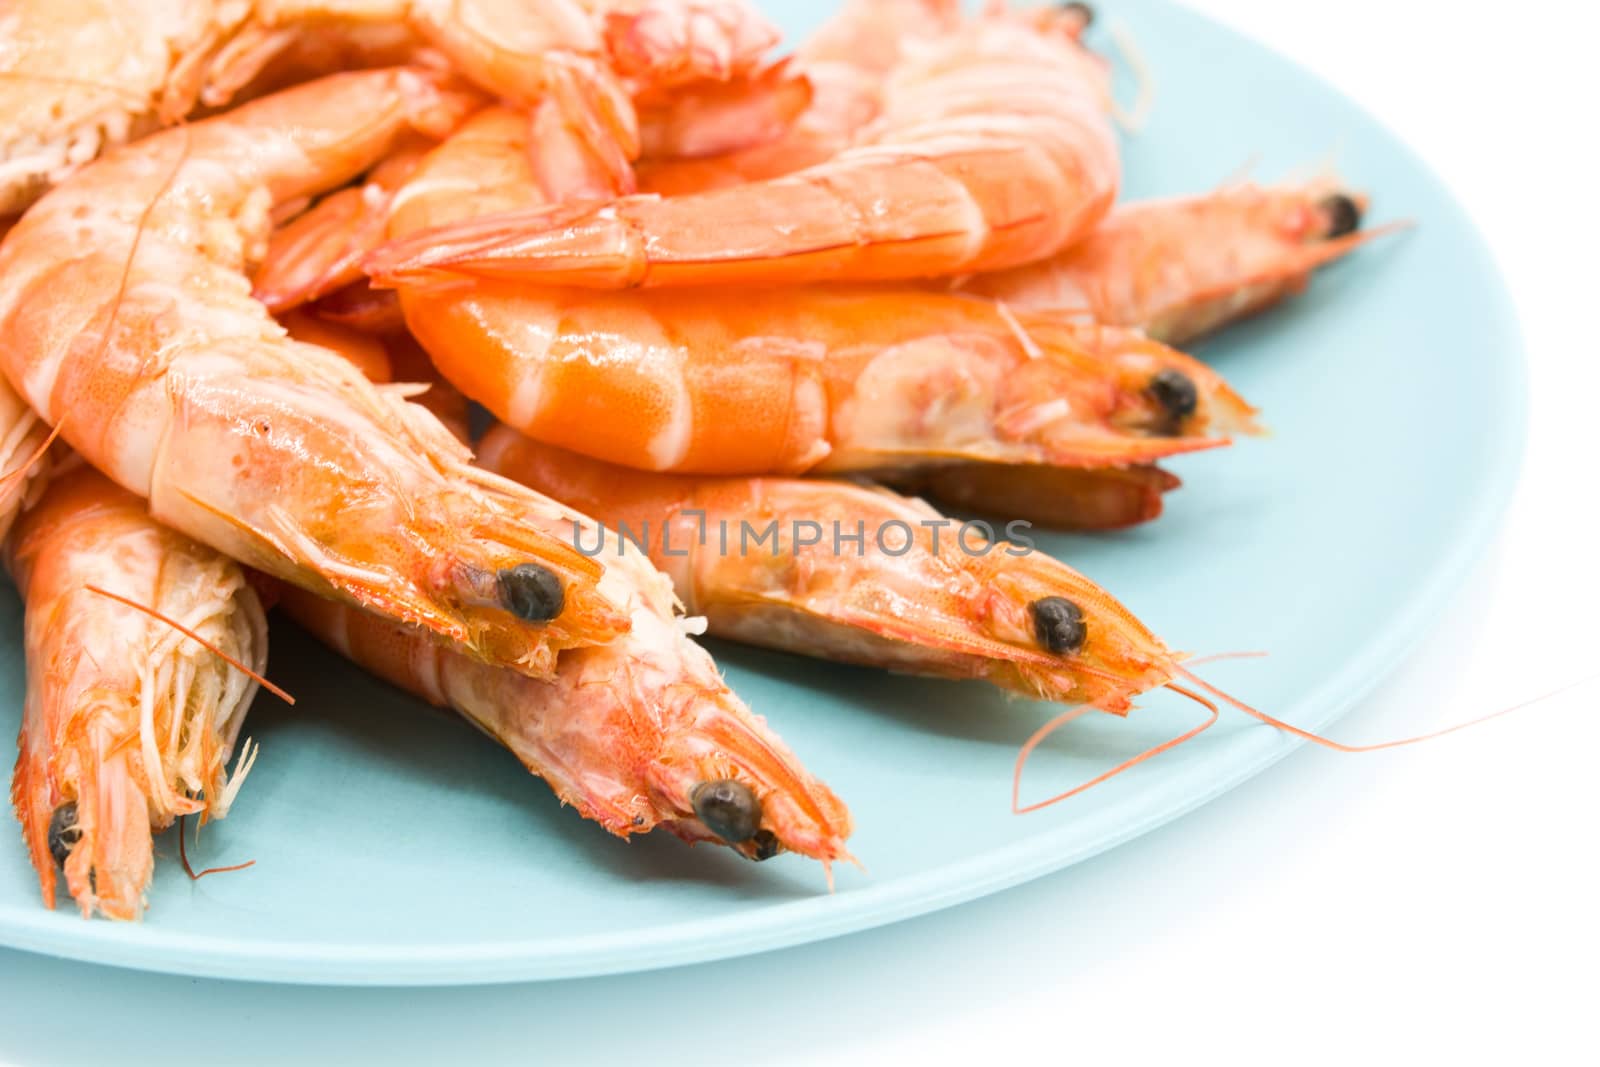 Grilled shrimps on blue plate isolated on white background